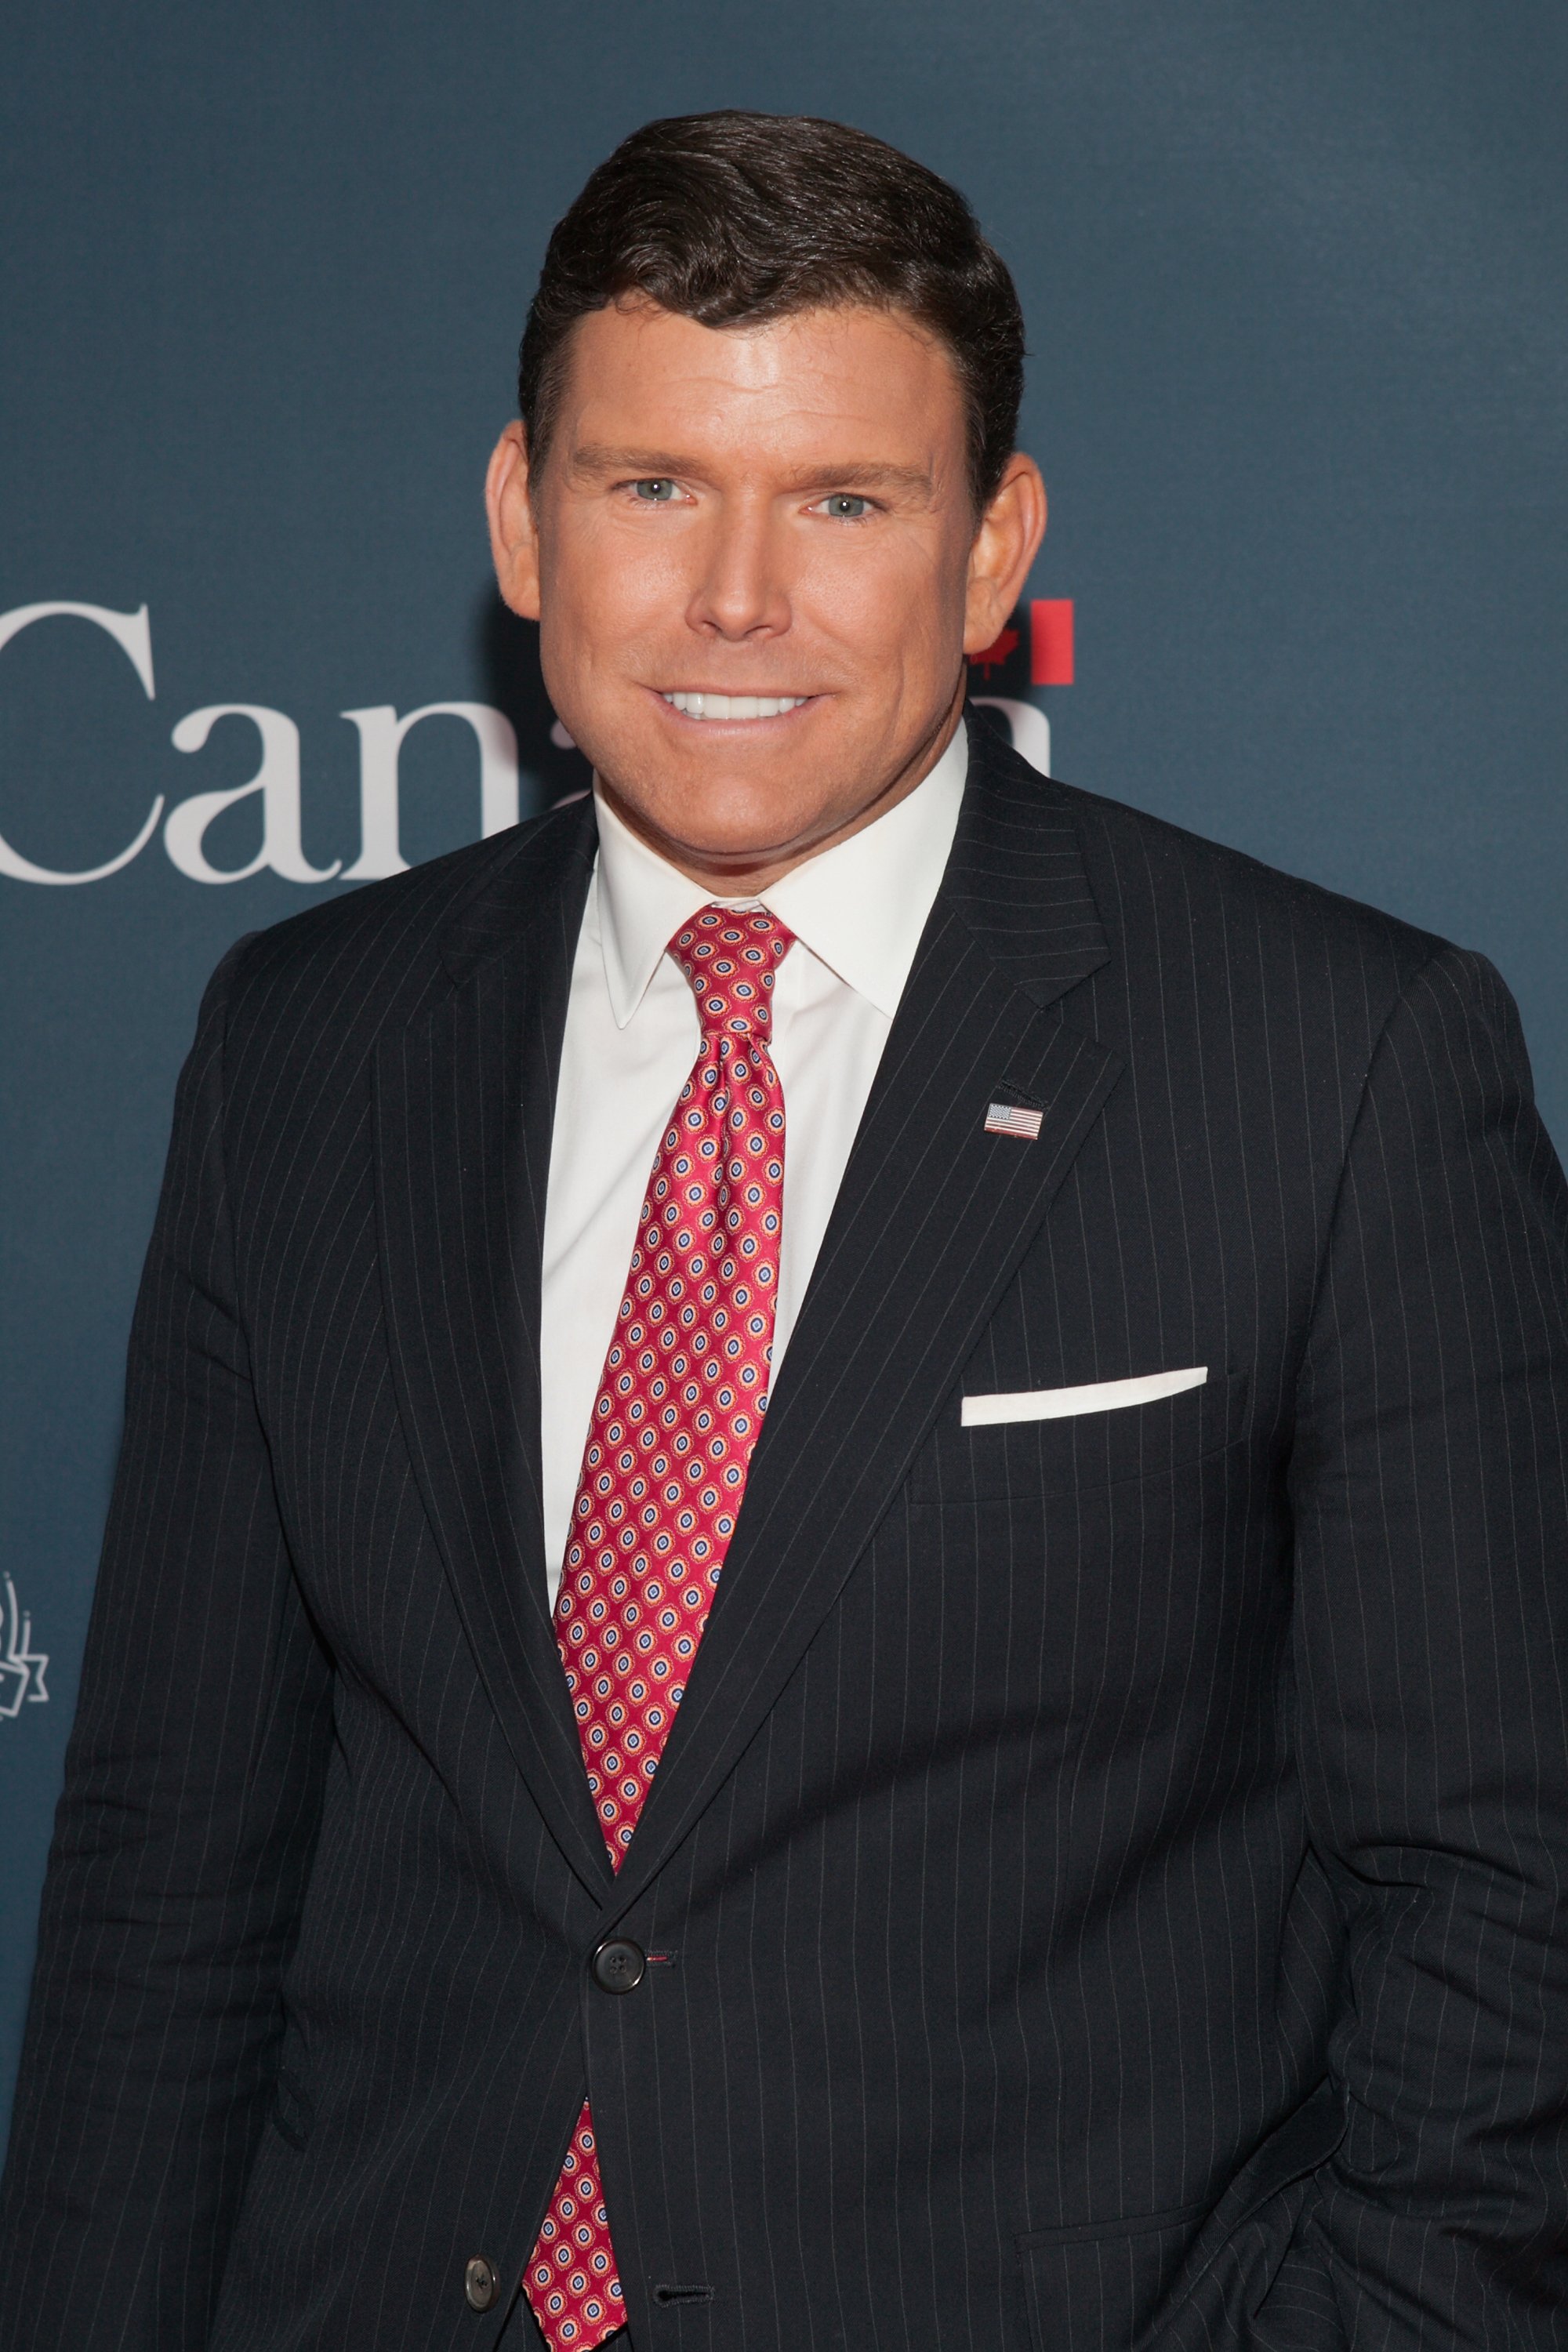  Bret Baier attends The Hill's and Entertainment Tonight's celebration of the 100th White House Correspondents' Association Dinner weekend on May 2, 2014, in Washington, DC. | Source: Getty Images.